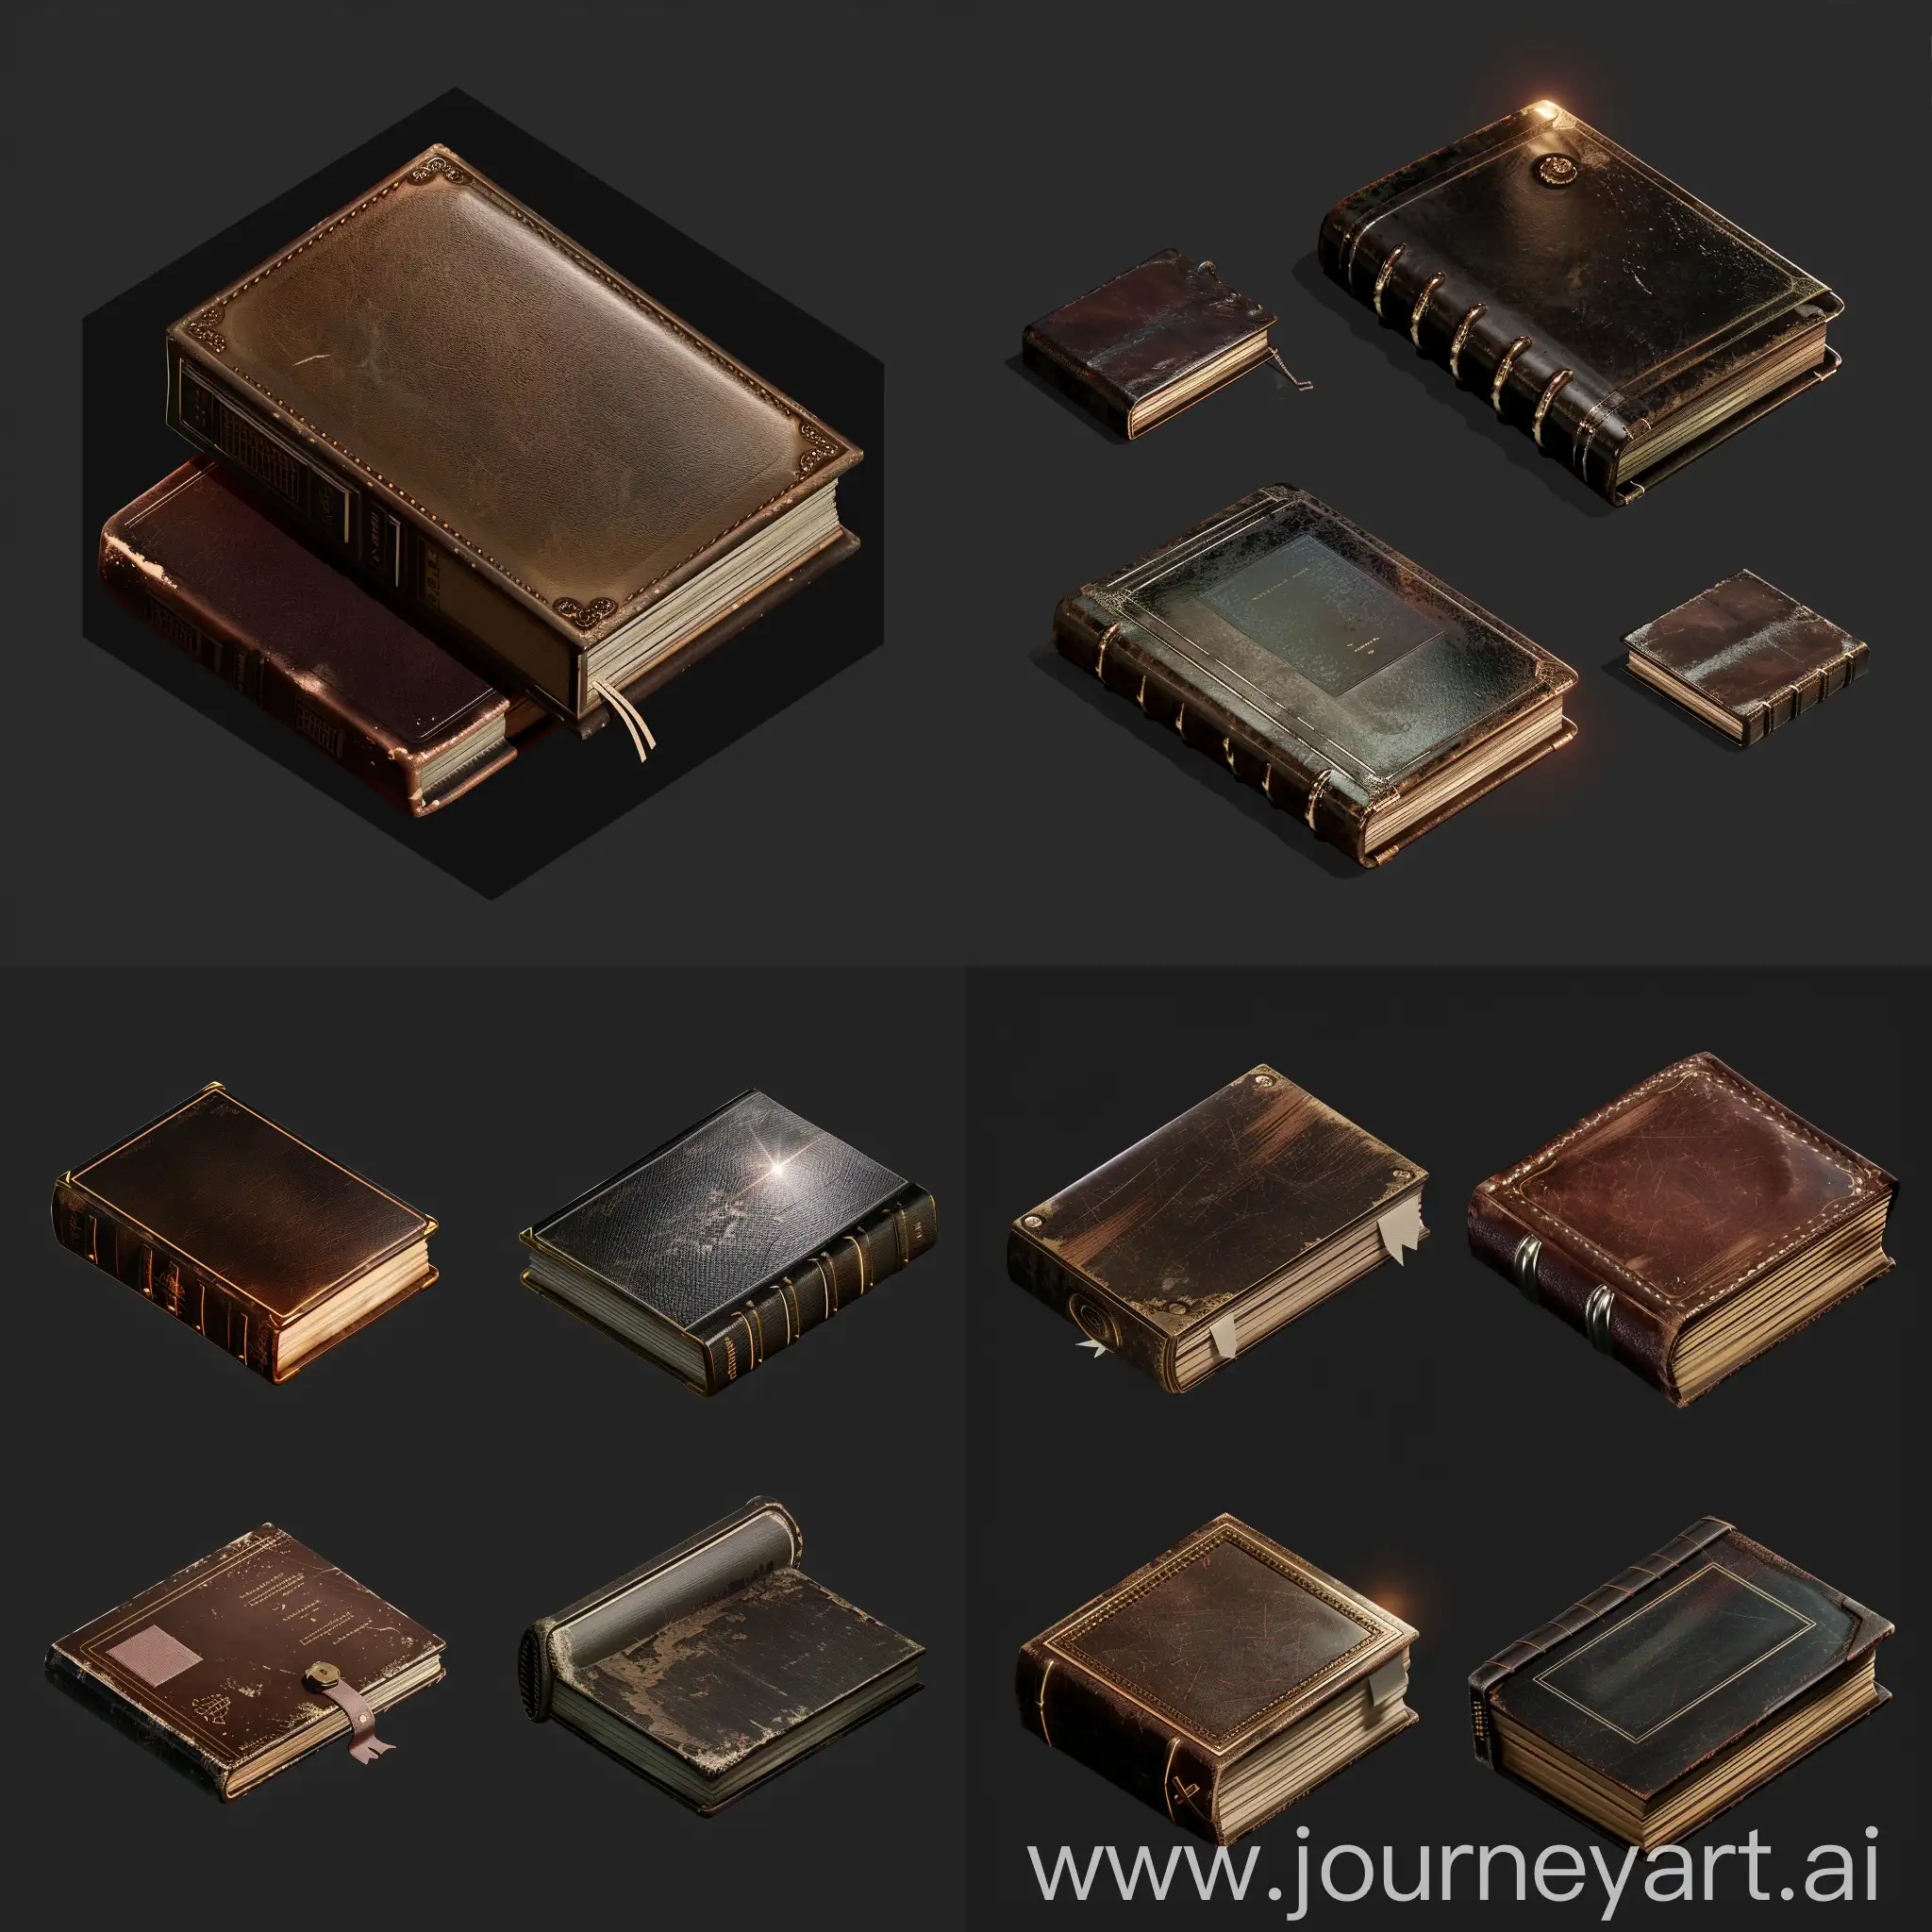 https://i.imgur.com/Do8RrB5.png realistic photo of isometric set old simple worn book without labels in style of made in blender realistic 3d game asset, shiny, lighting, leather cover, isometric set